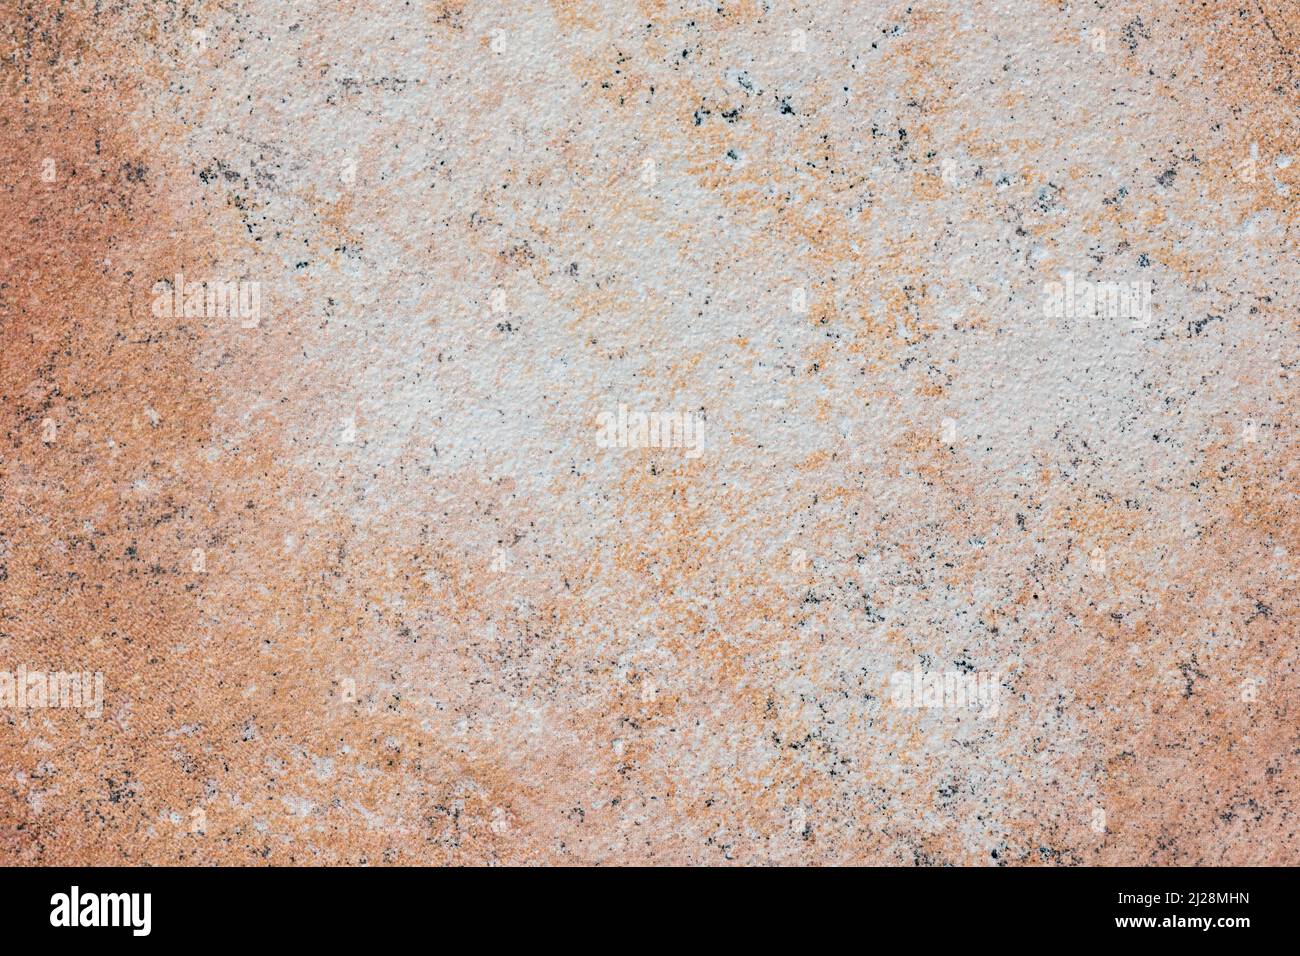 Texture of contemporary patterned outdoor tile. High quality background. Stock Photo